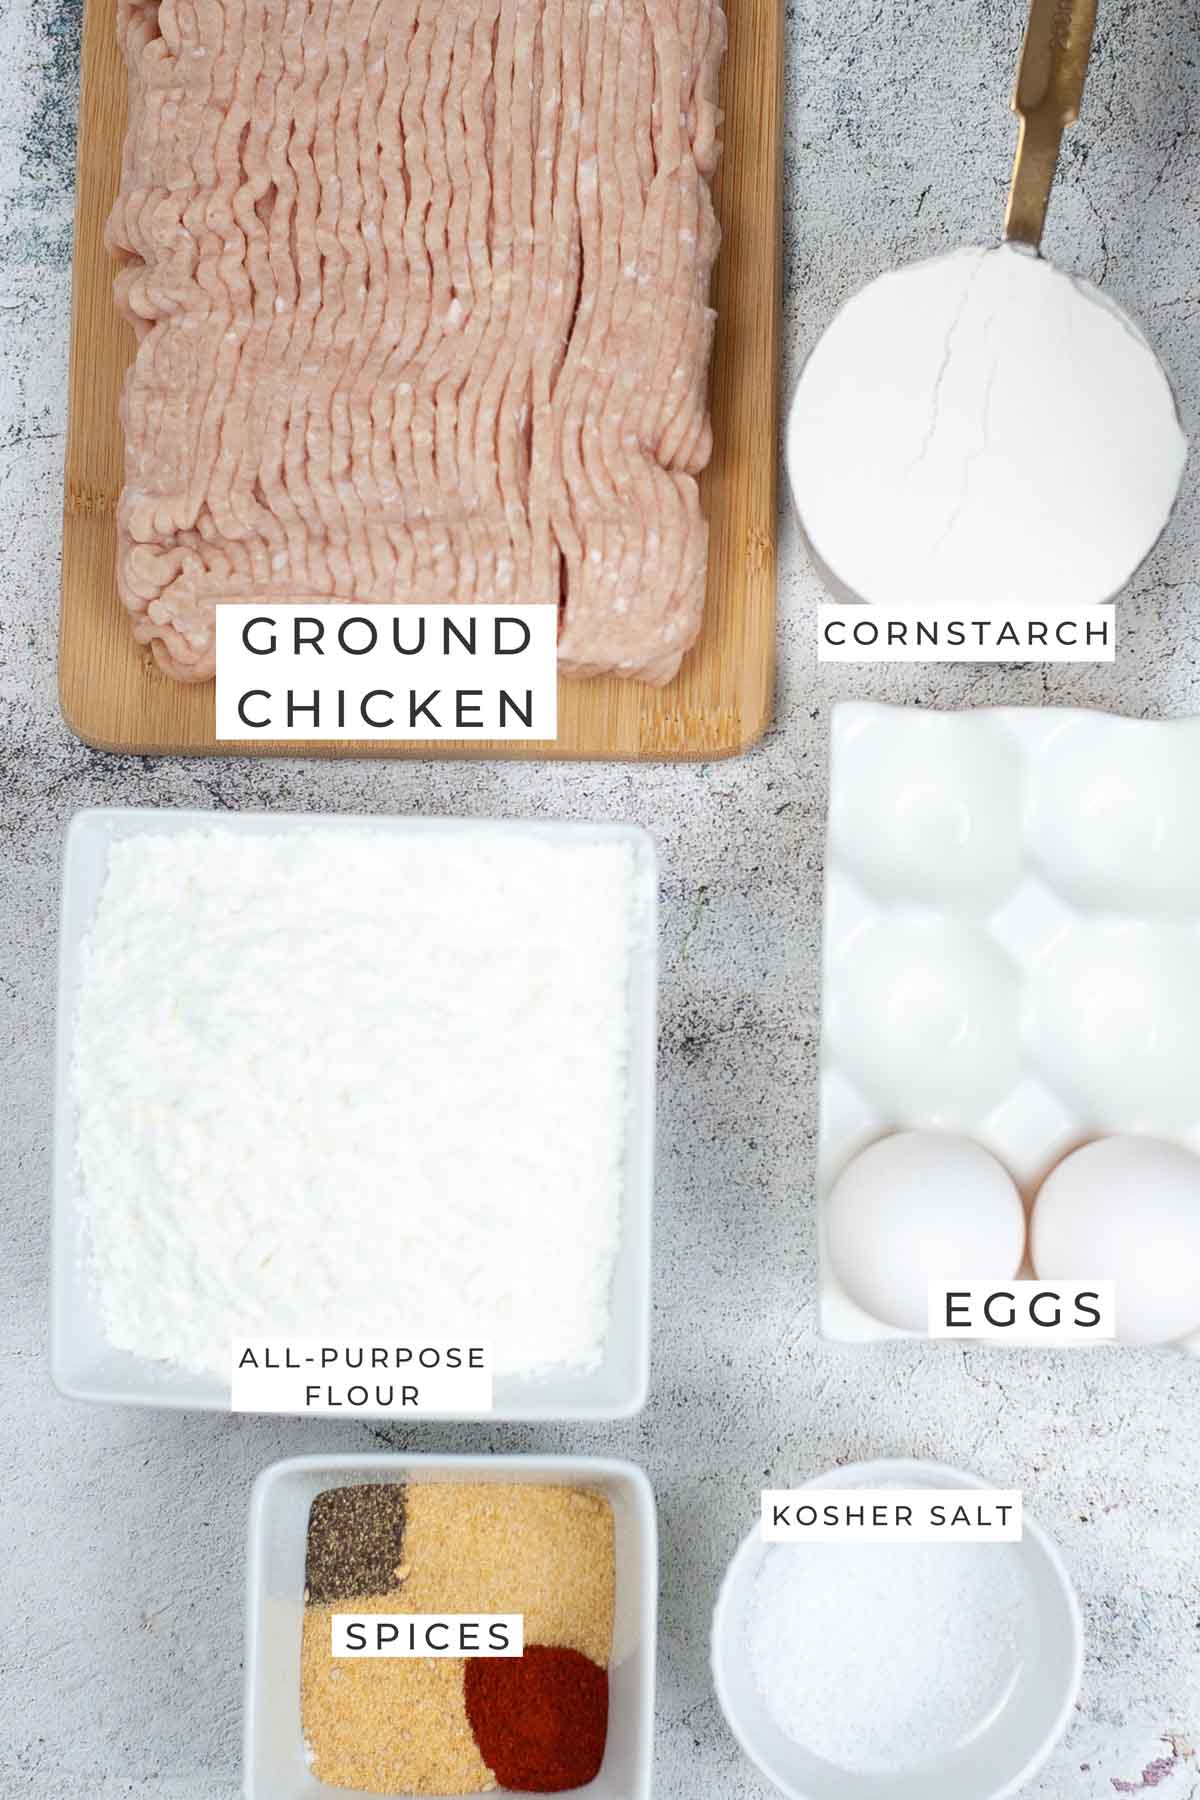 Labeled ingredients for the chicken nuggets.